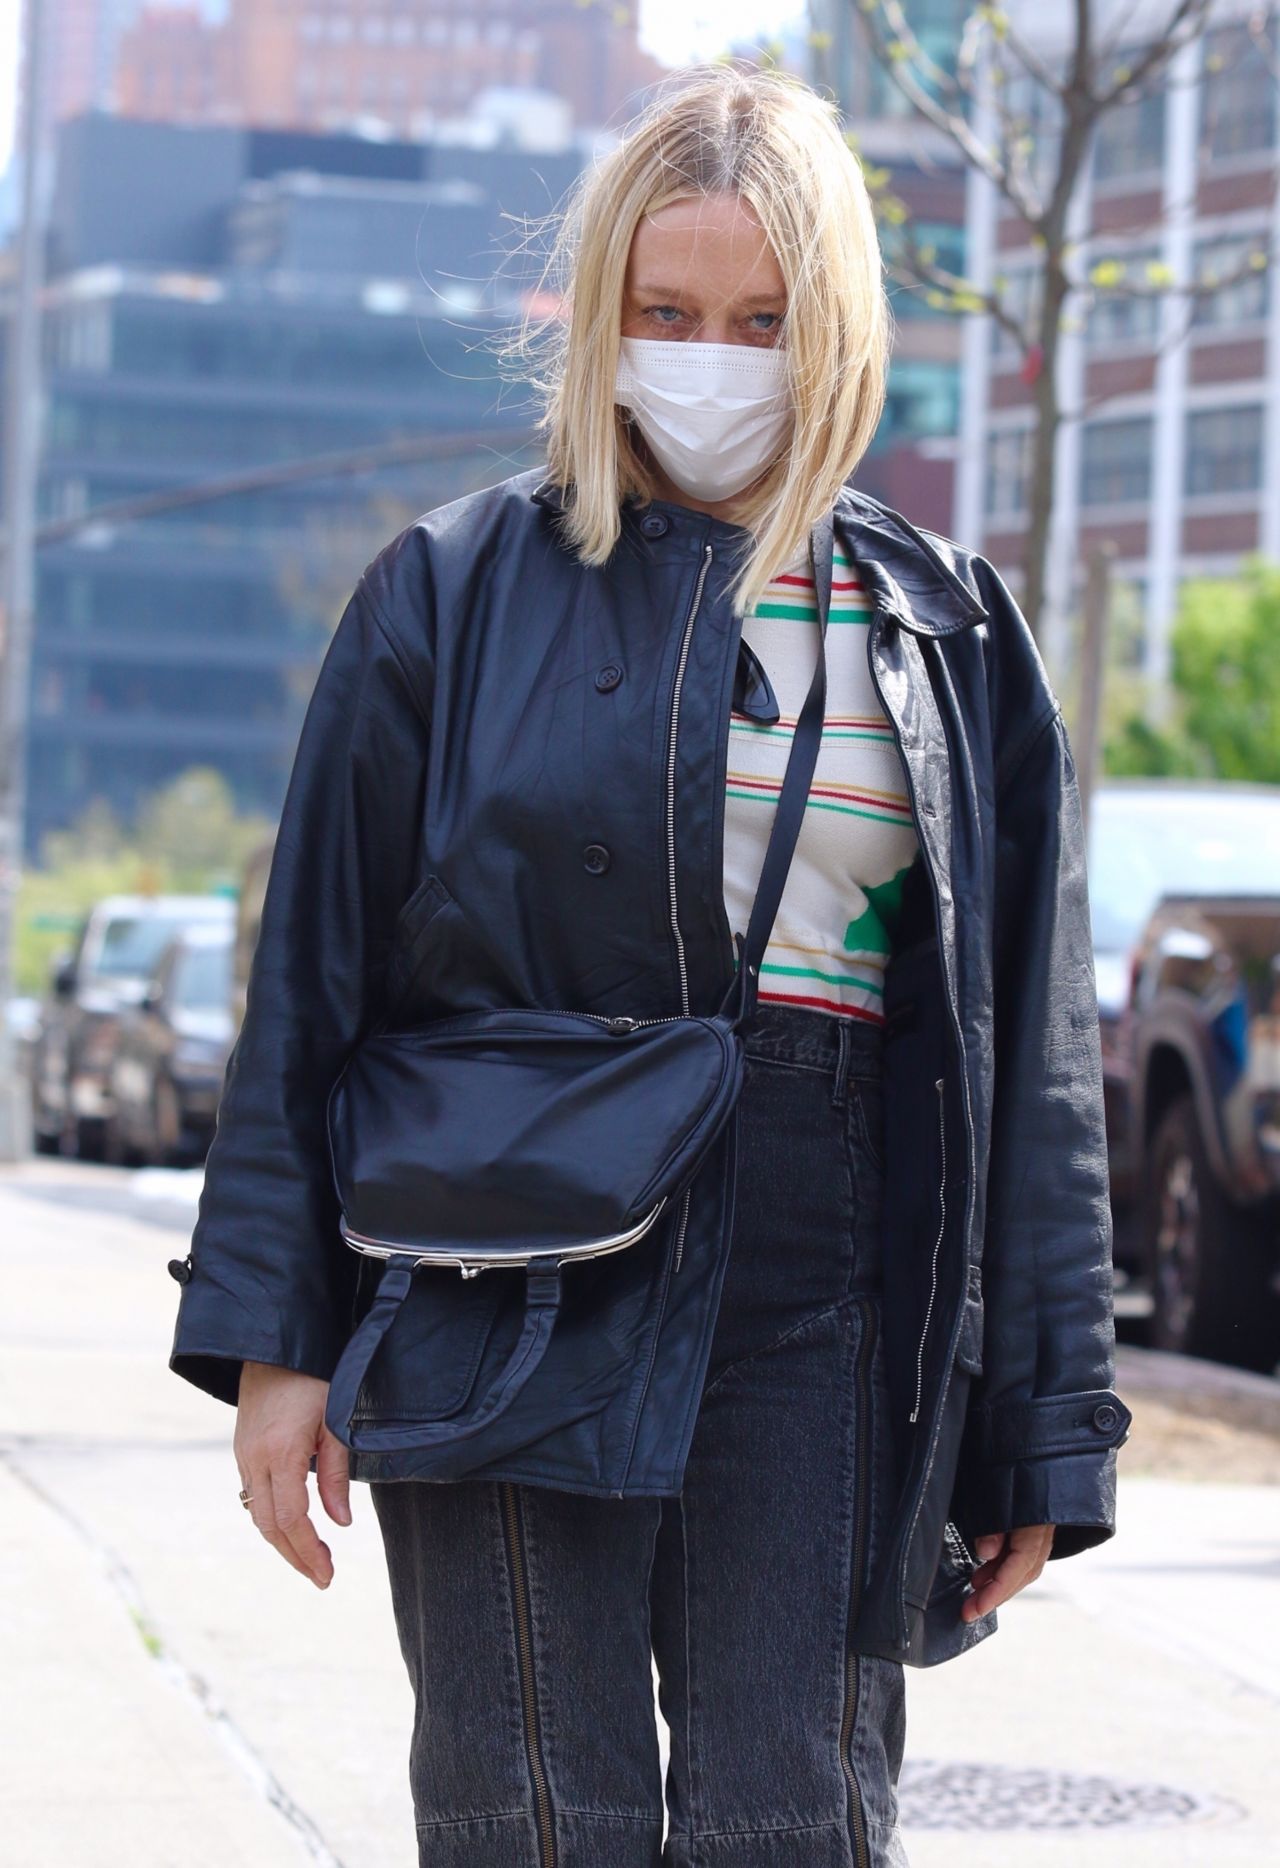 Chloe Sevigny spotted in New York with the GG Marmont top handle